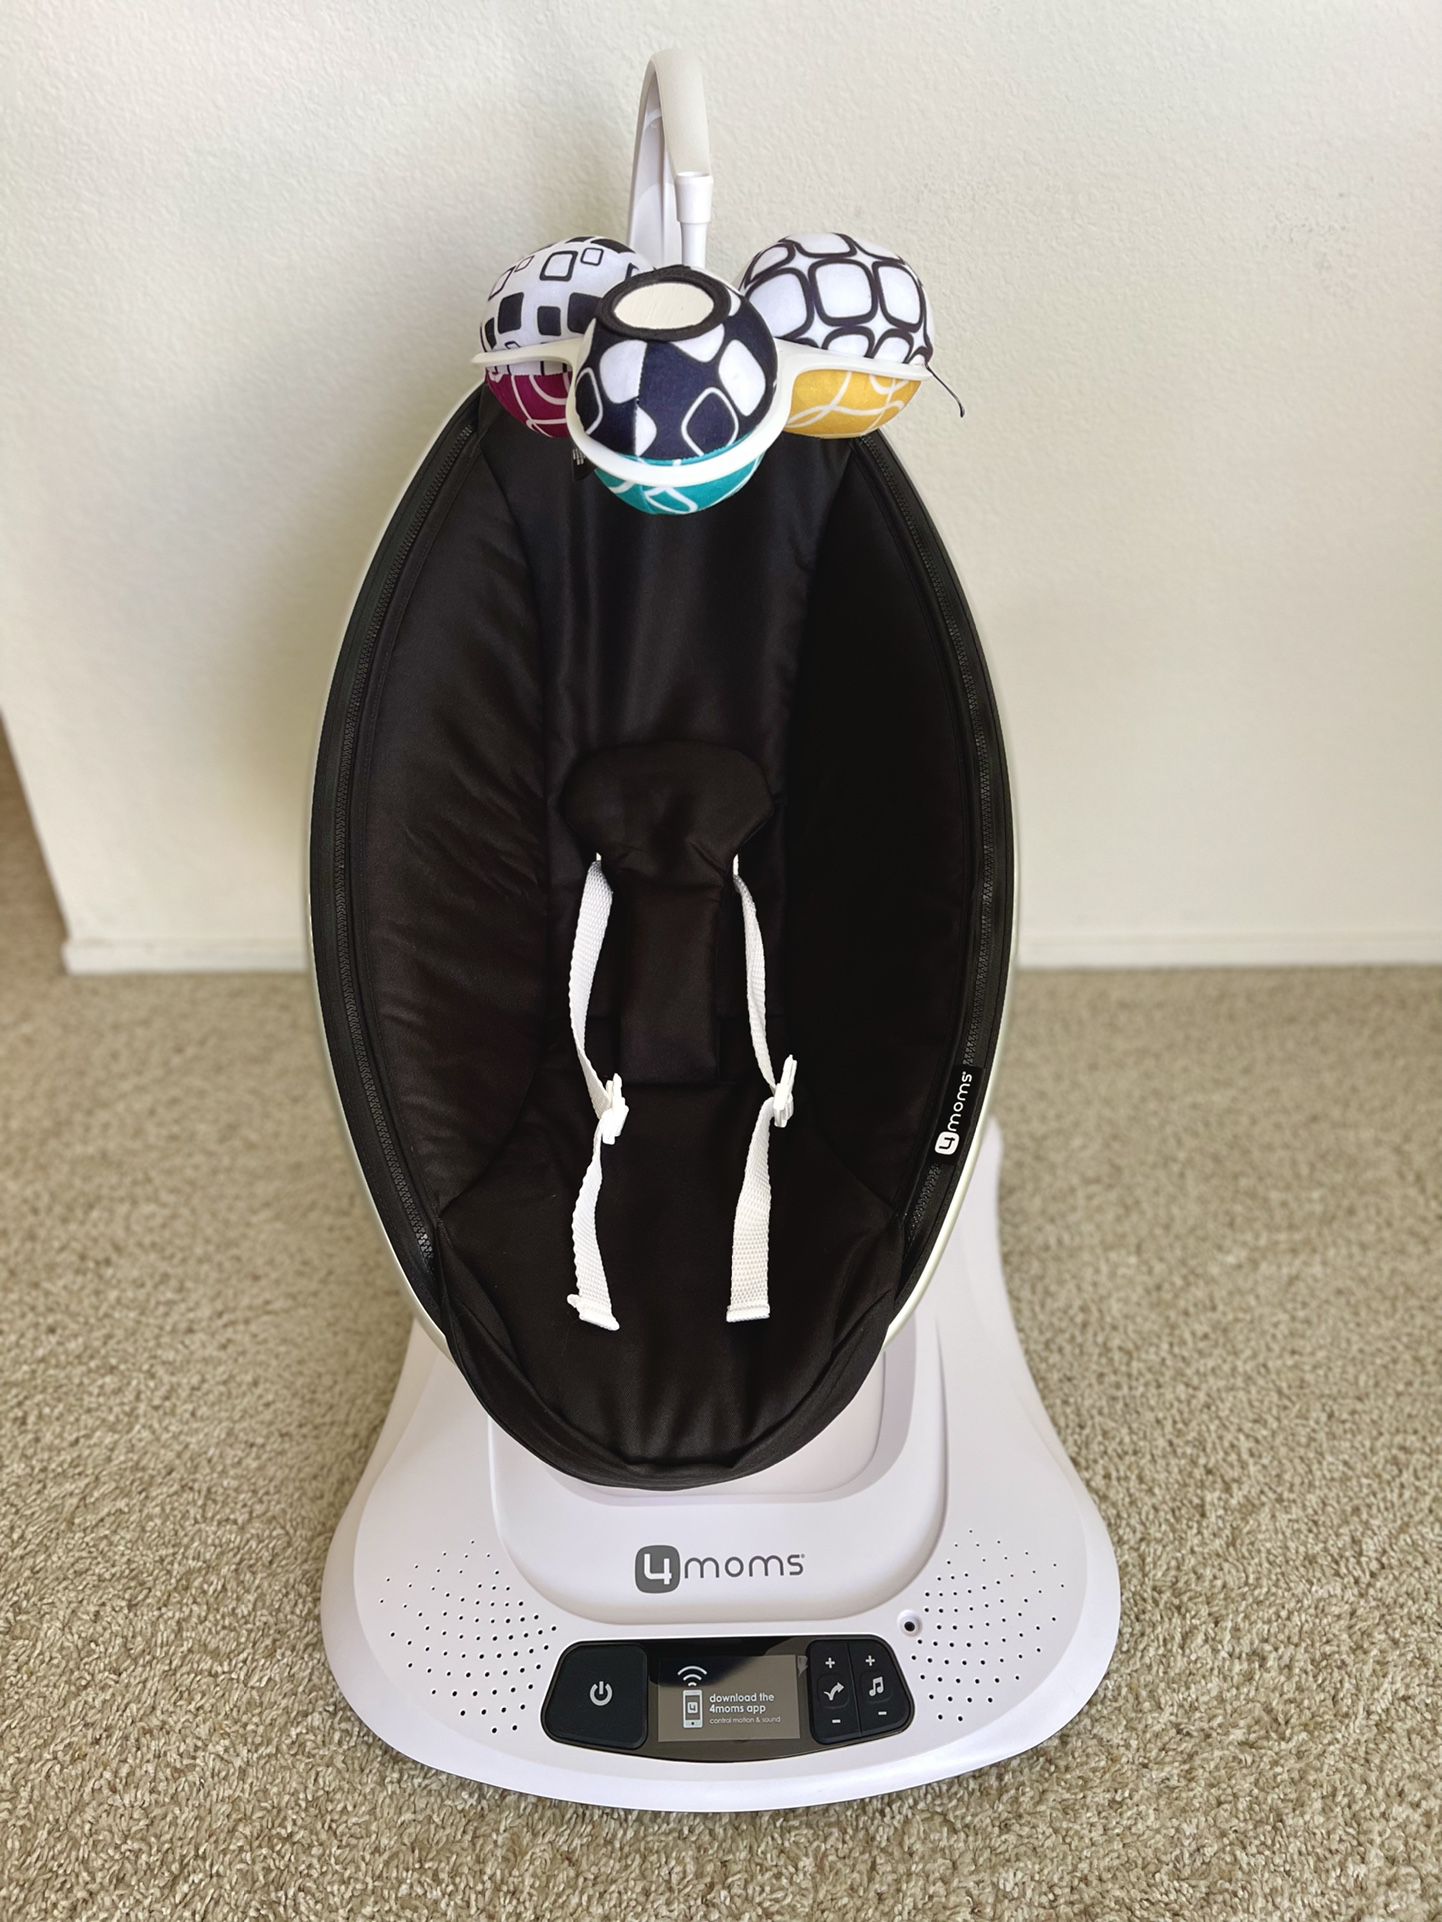 4moms mamaRoo 4 Baby Swing, Bluetooth Baby Rocker with 5 Unique Motions, Smooth, Nylon Fabric, Black